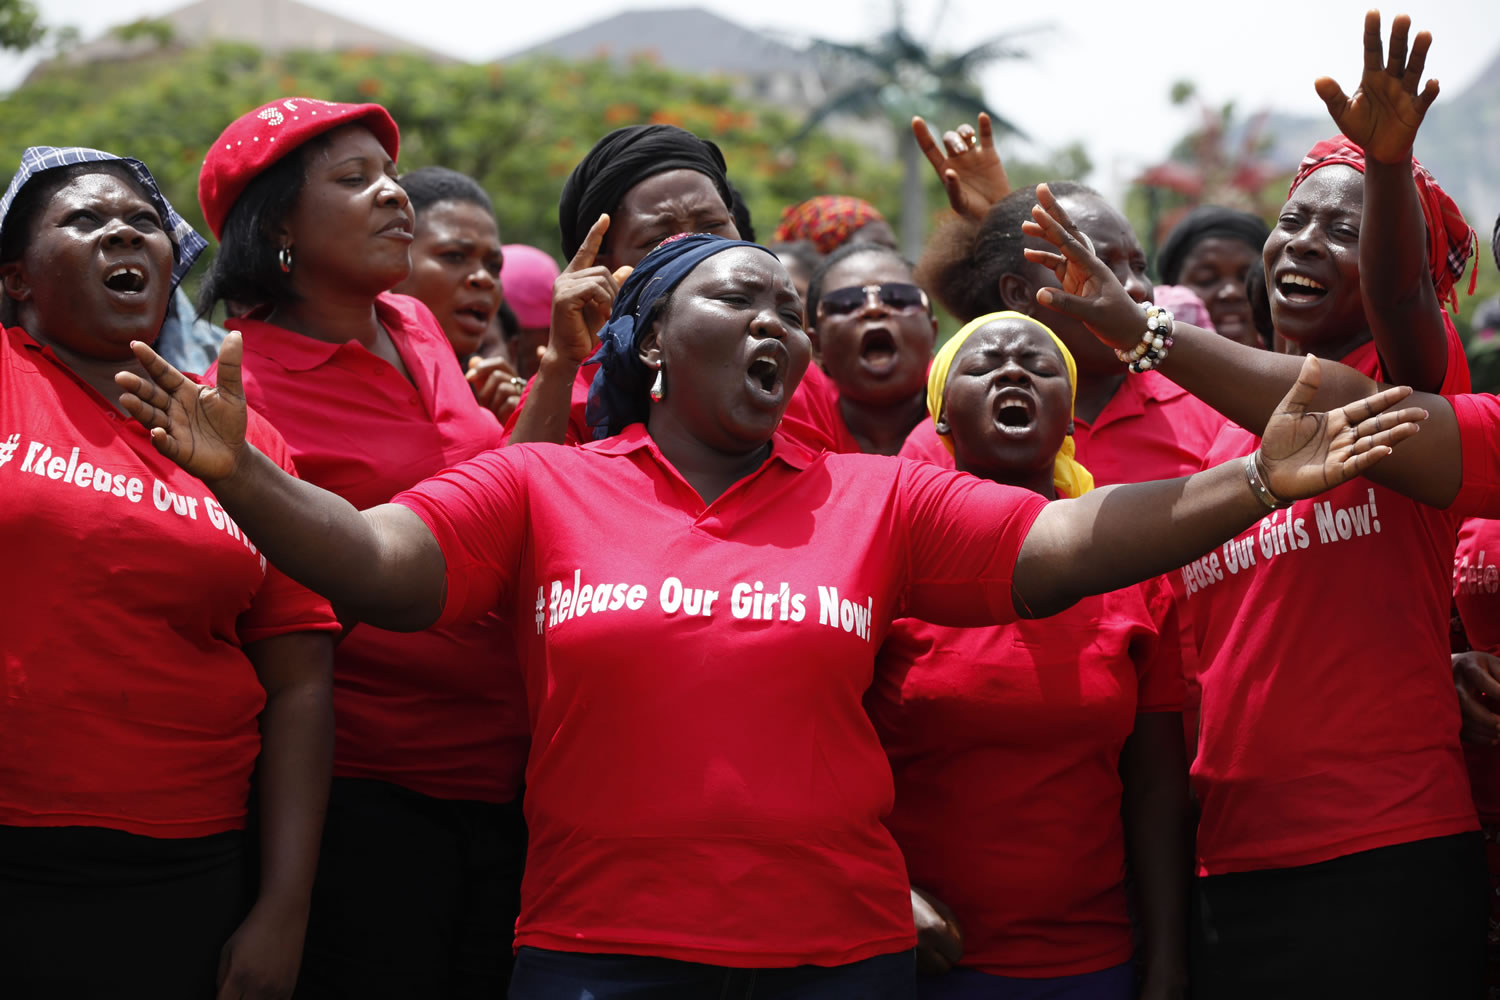 Women sing Tuesday at a prayer meeting in Abuja, Nigeria, calling on the government to rescue nearly 300 students kidnapped more than a month ago.